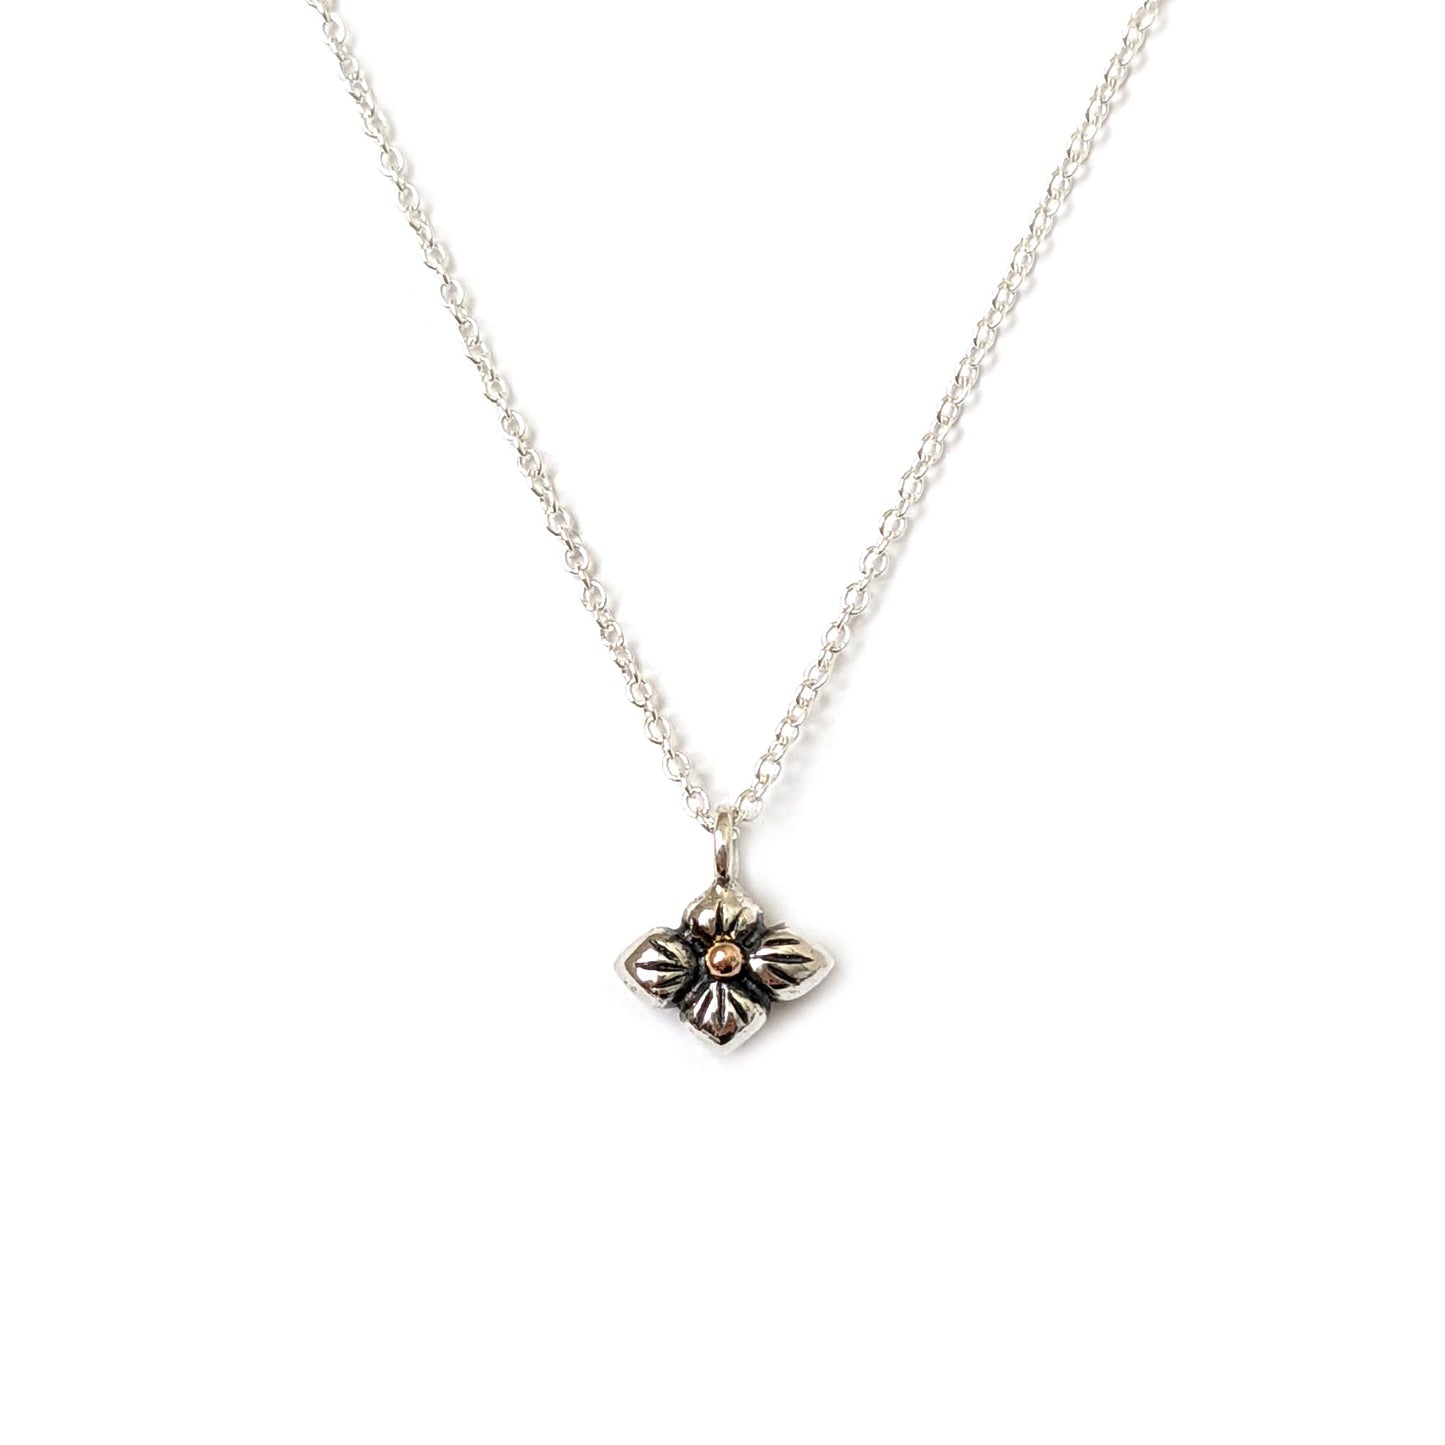 Fairly Floral Necklace II